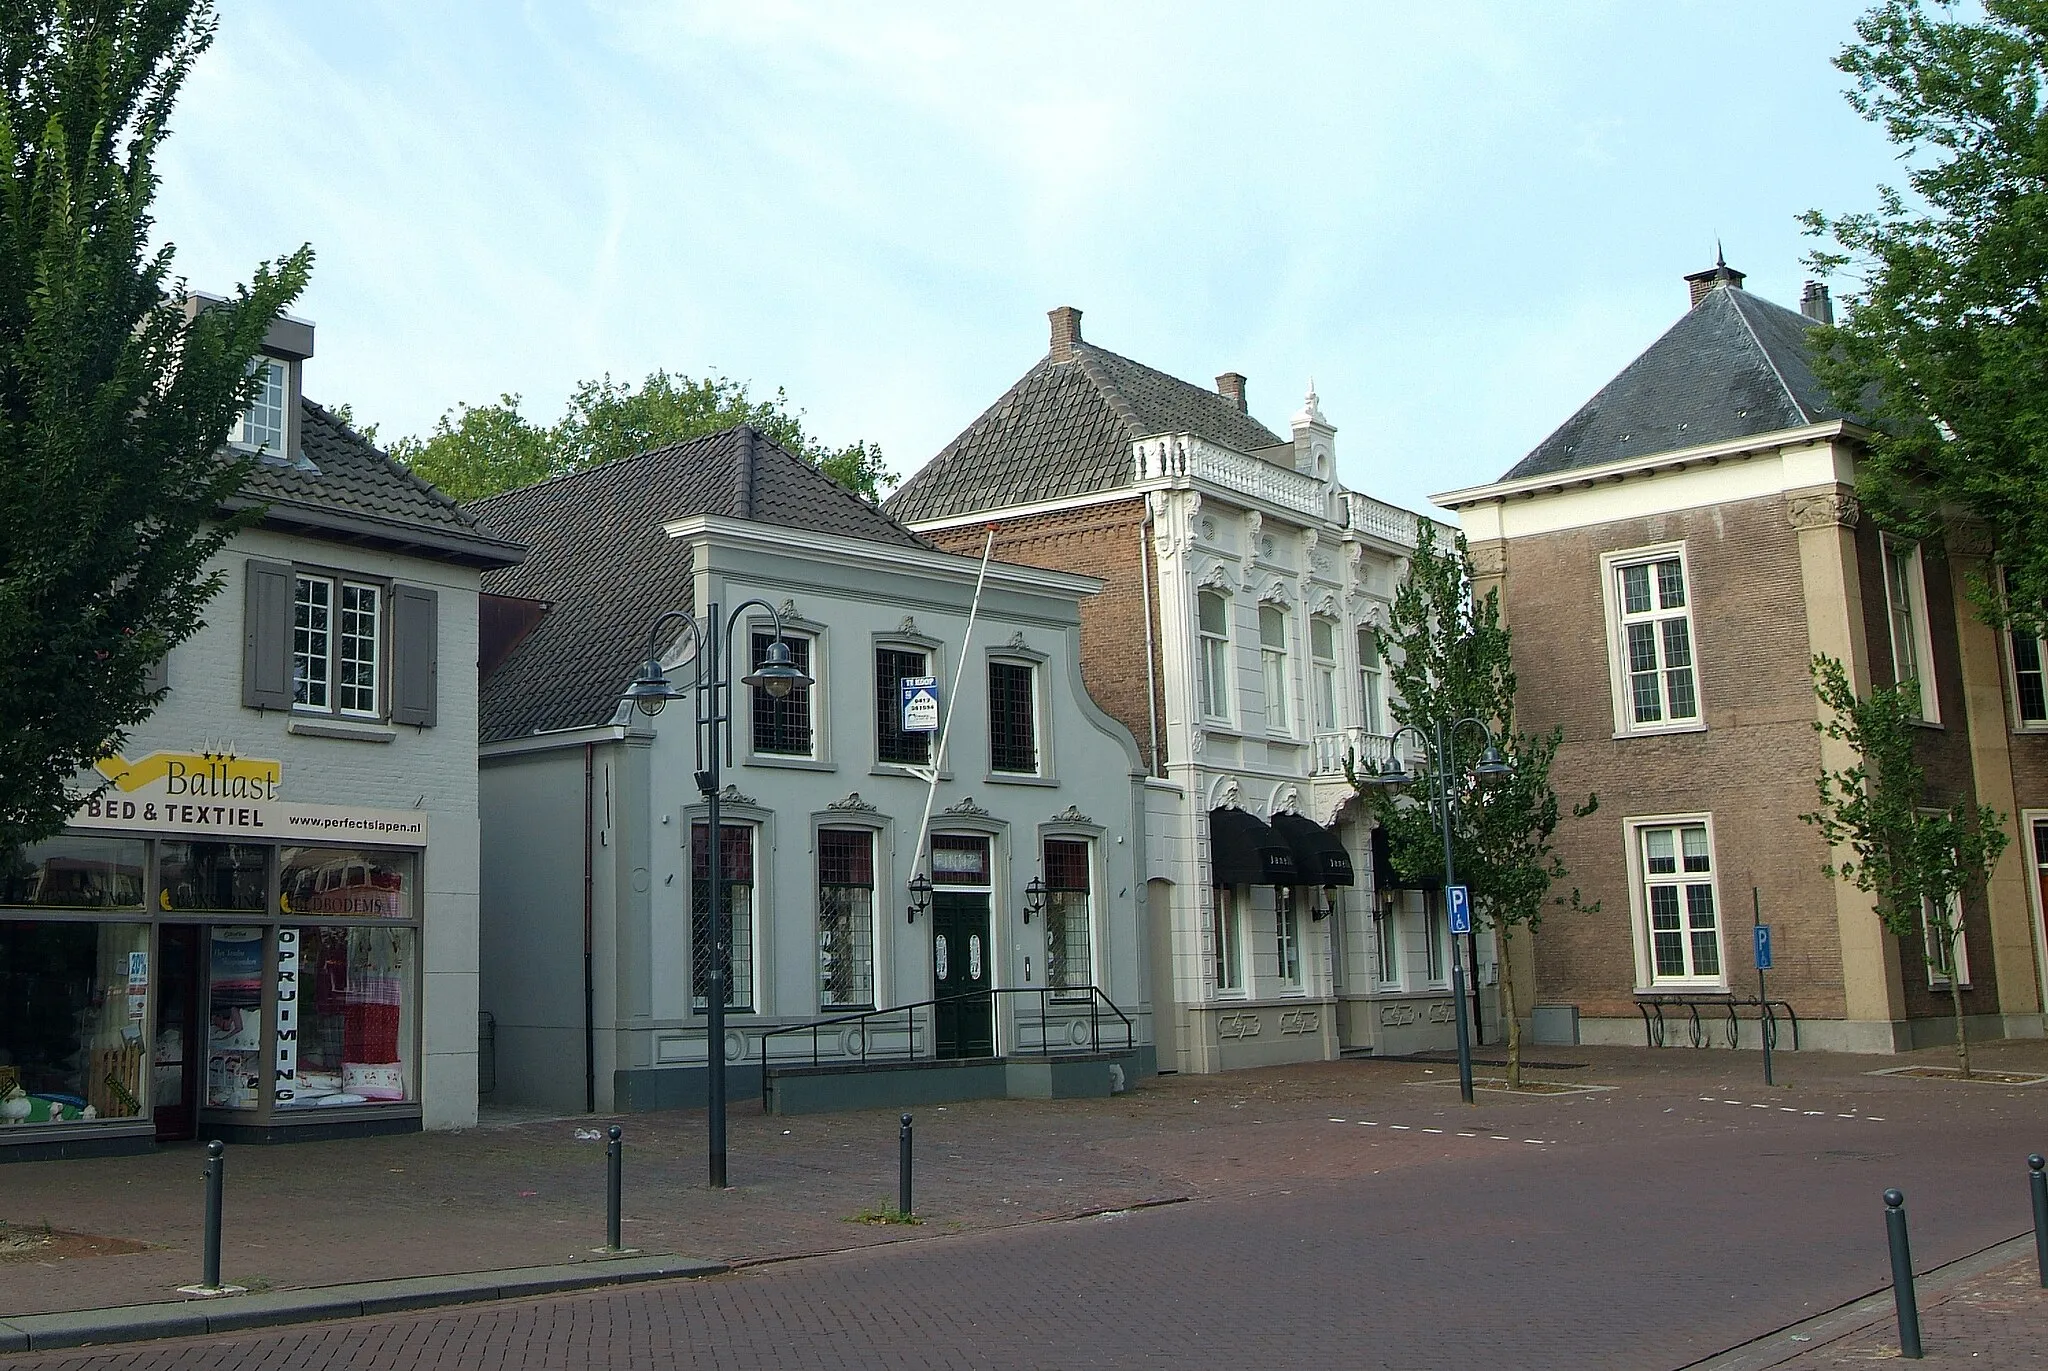 Photo showing: Monumental buildings on the Hoofdstraat (Main Street) in Veghel, located at the old marketplace / market square